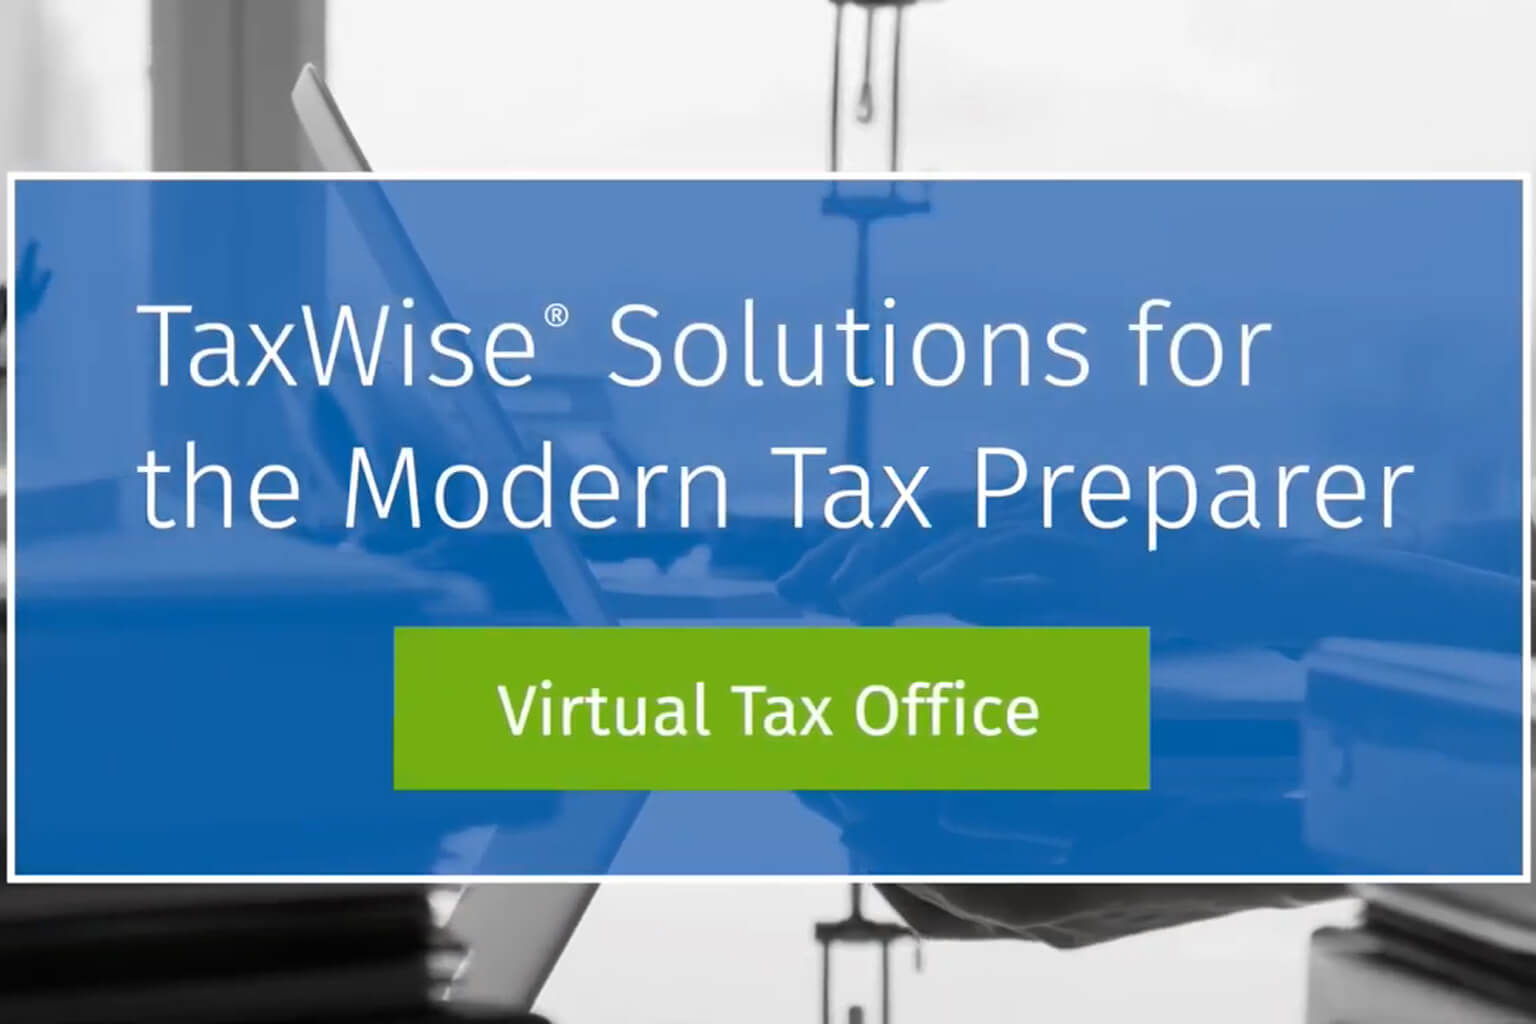 card-asset-video-product-taxwise-solutions-for-the-modern-tax-preparer-1536x1024